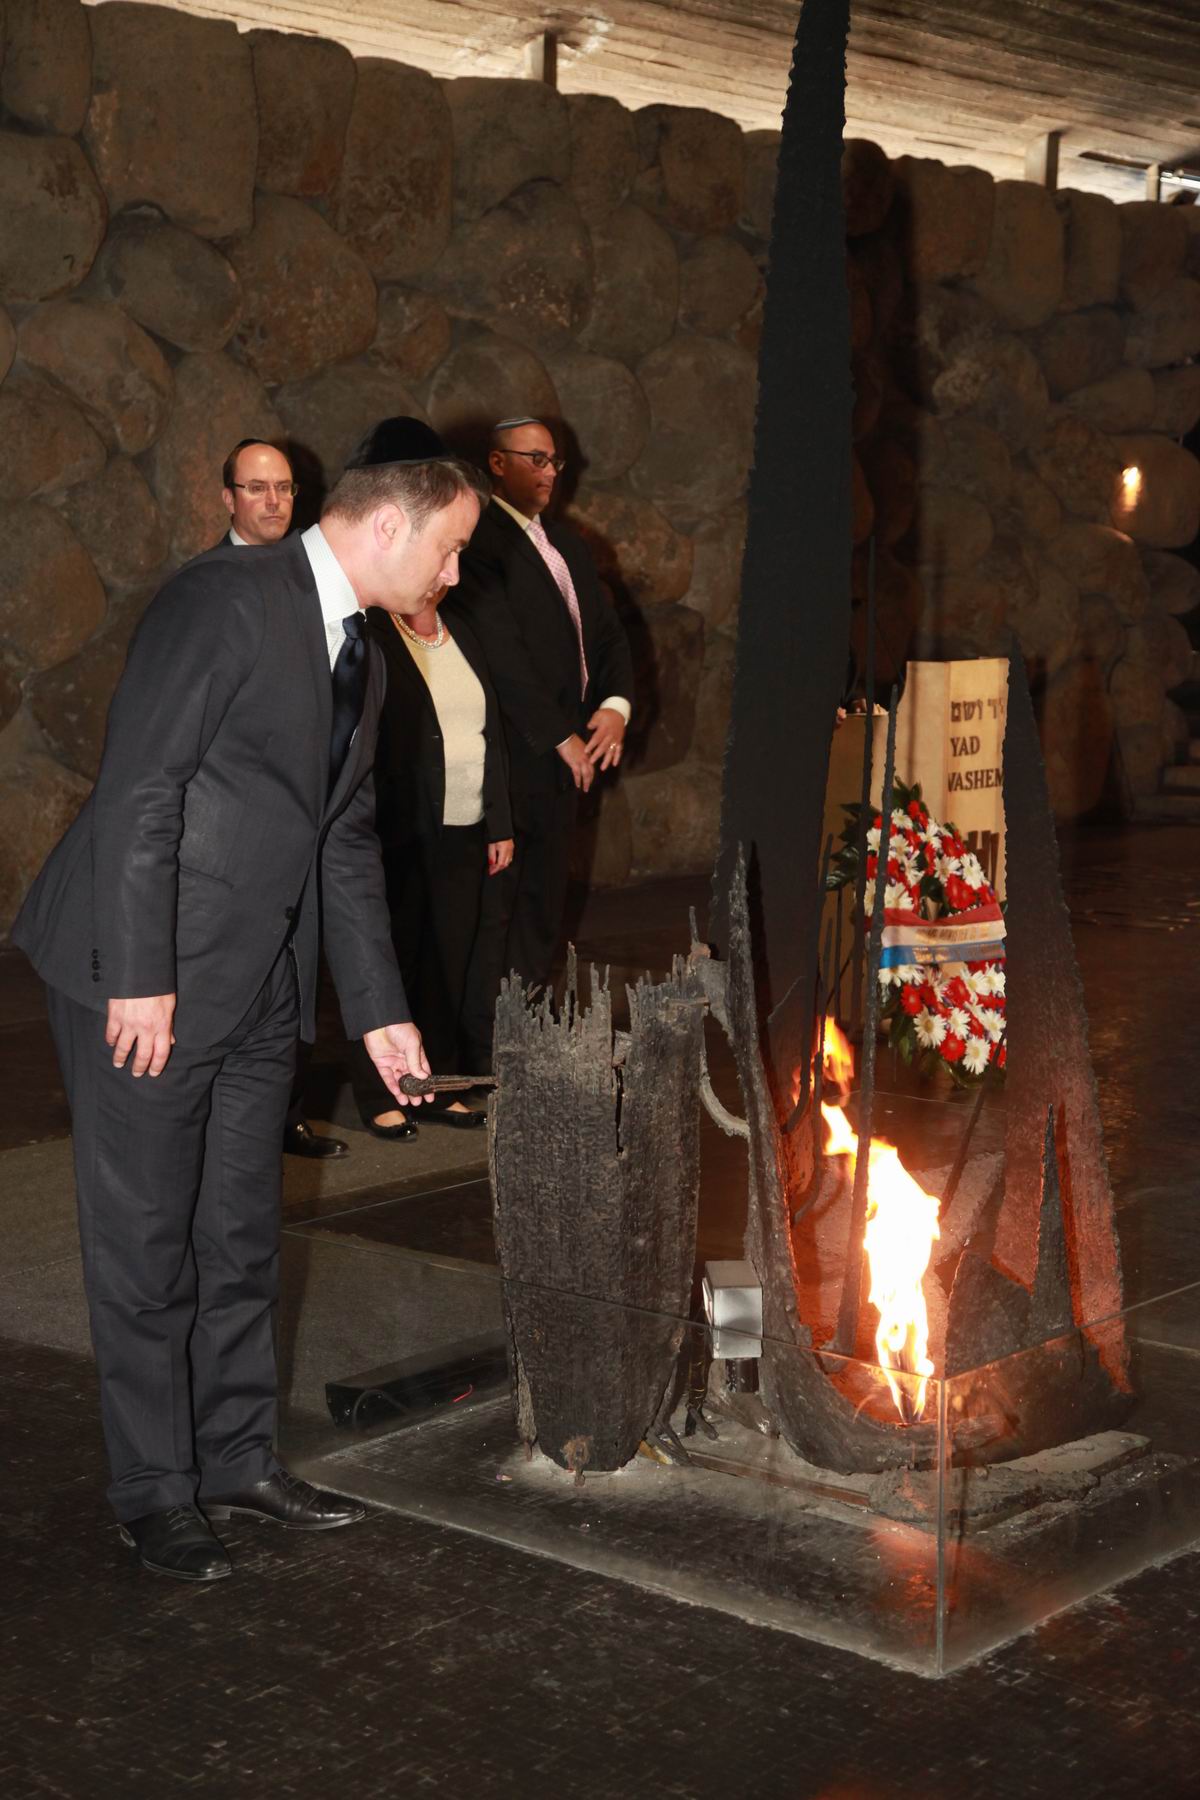 The Prime Minister was honored to rekindle the Eternal Flame in the Hall of Remembrance in memory of the six million Jewish victims of Nazi Germany